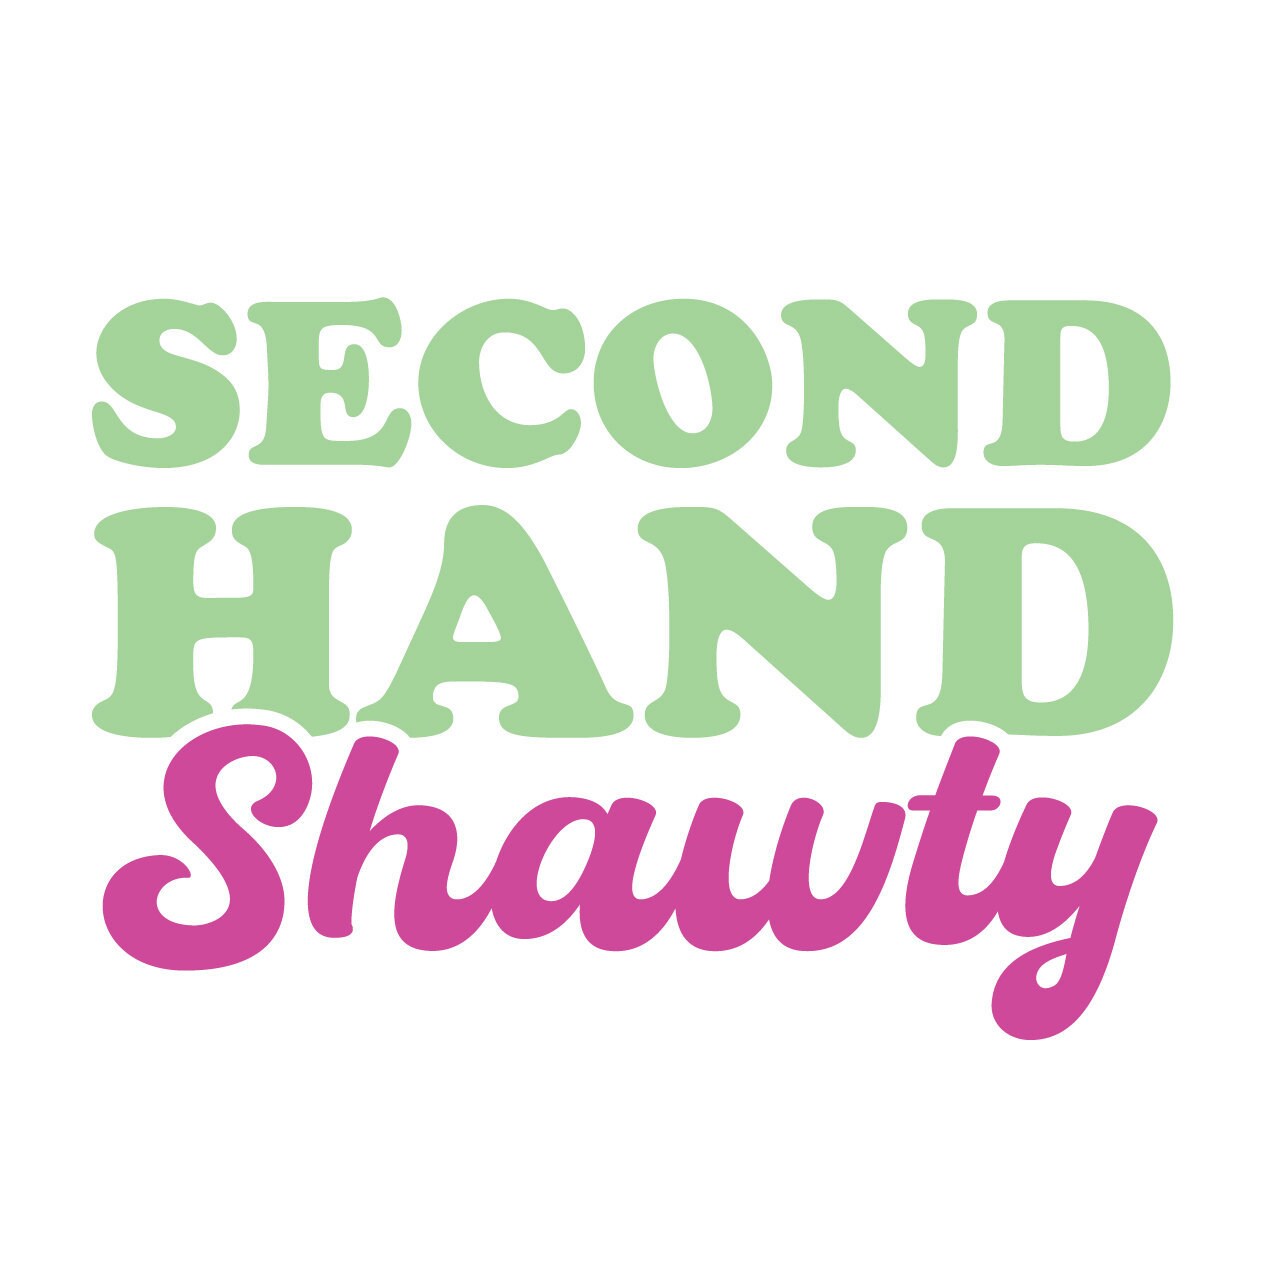 What Does Shawty Mean? All You Need To Know! - Love English